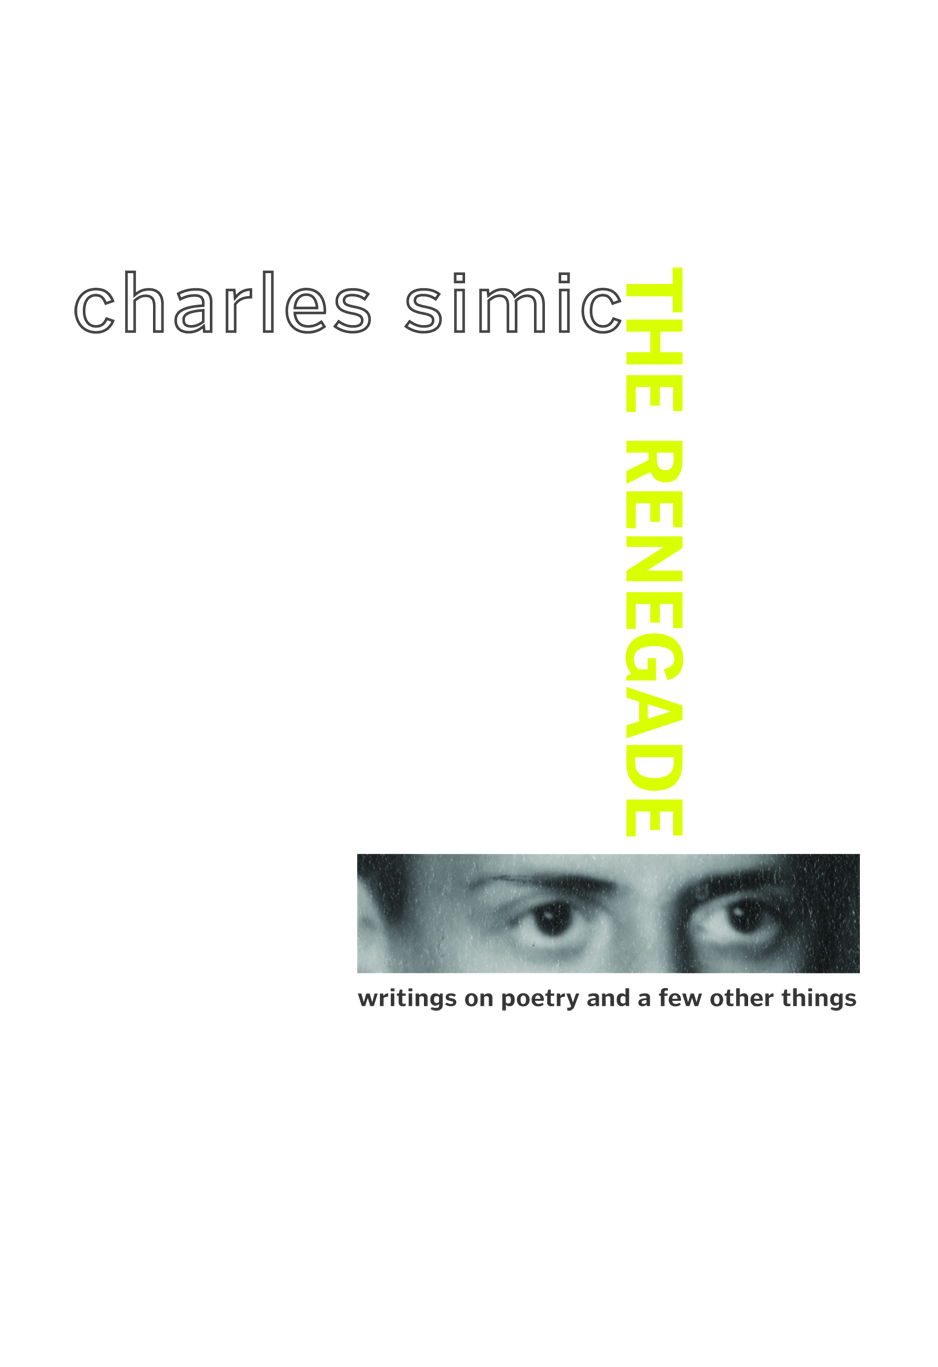 The Renegade by Charles Simic